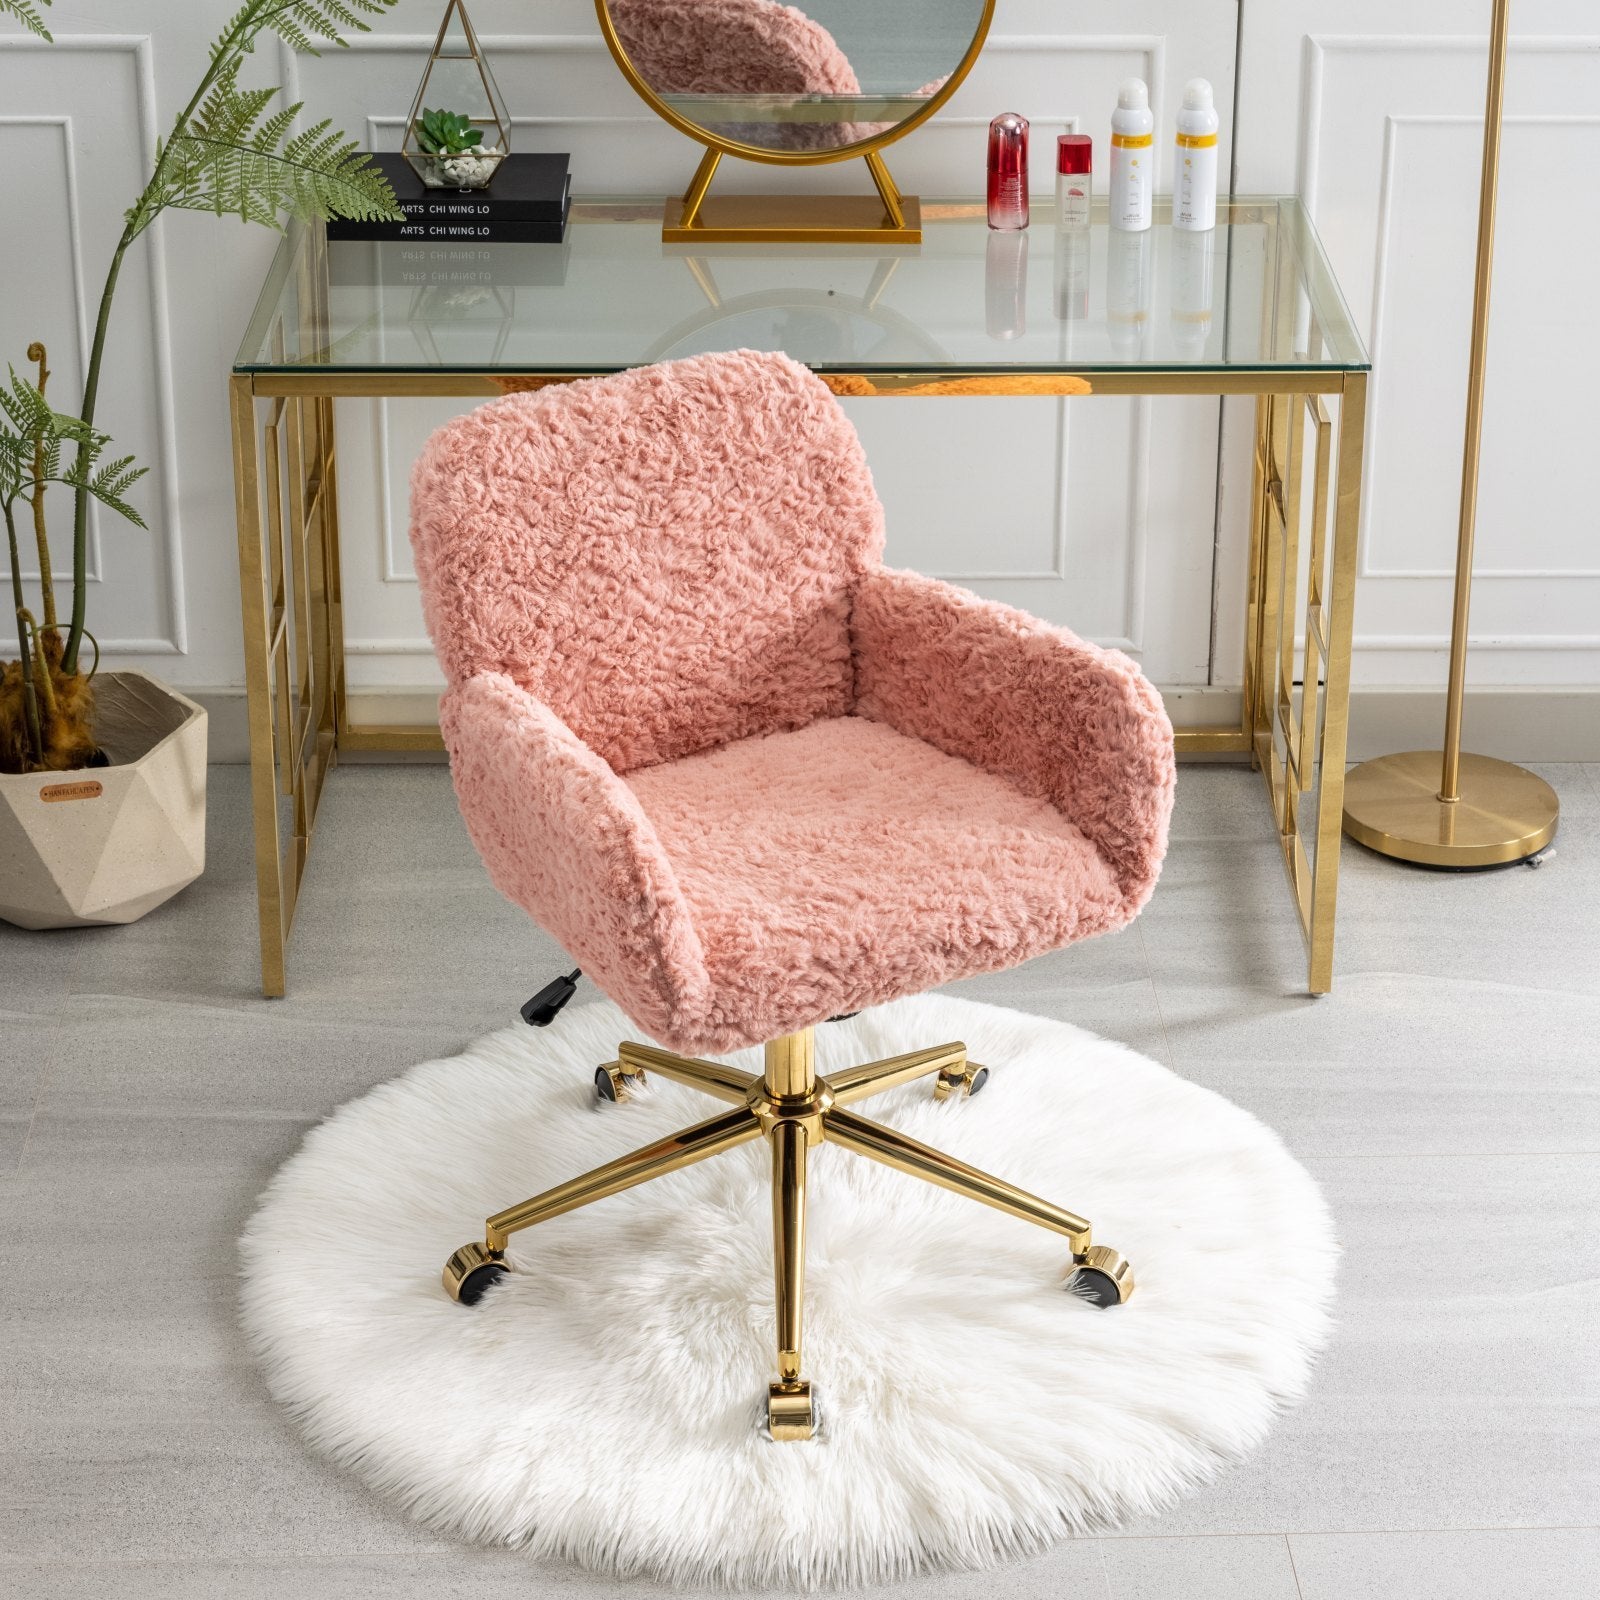 Office Chair with Golden Metal Base - Pink